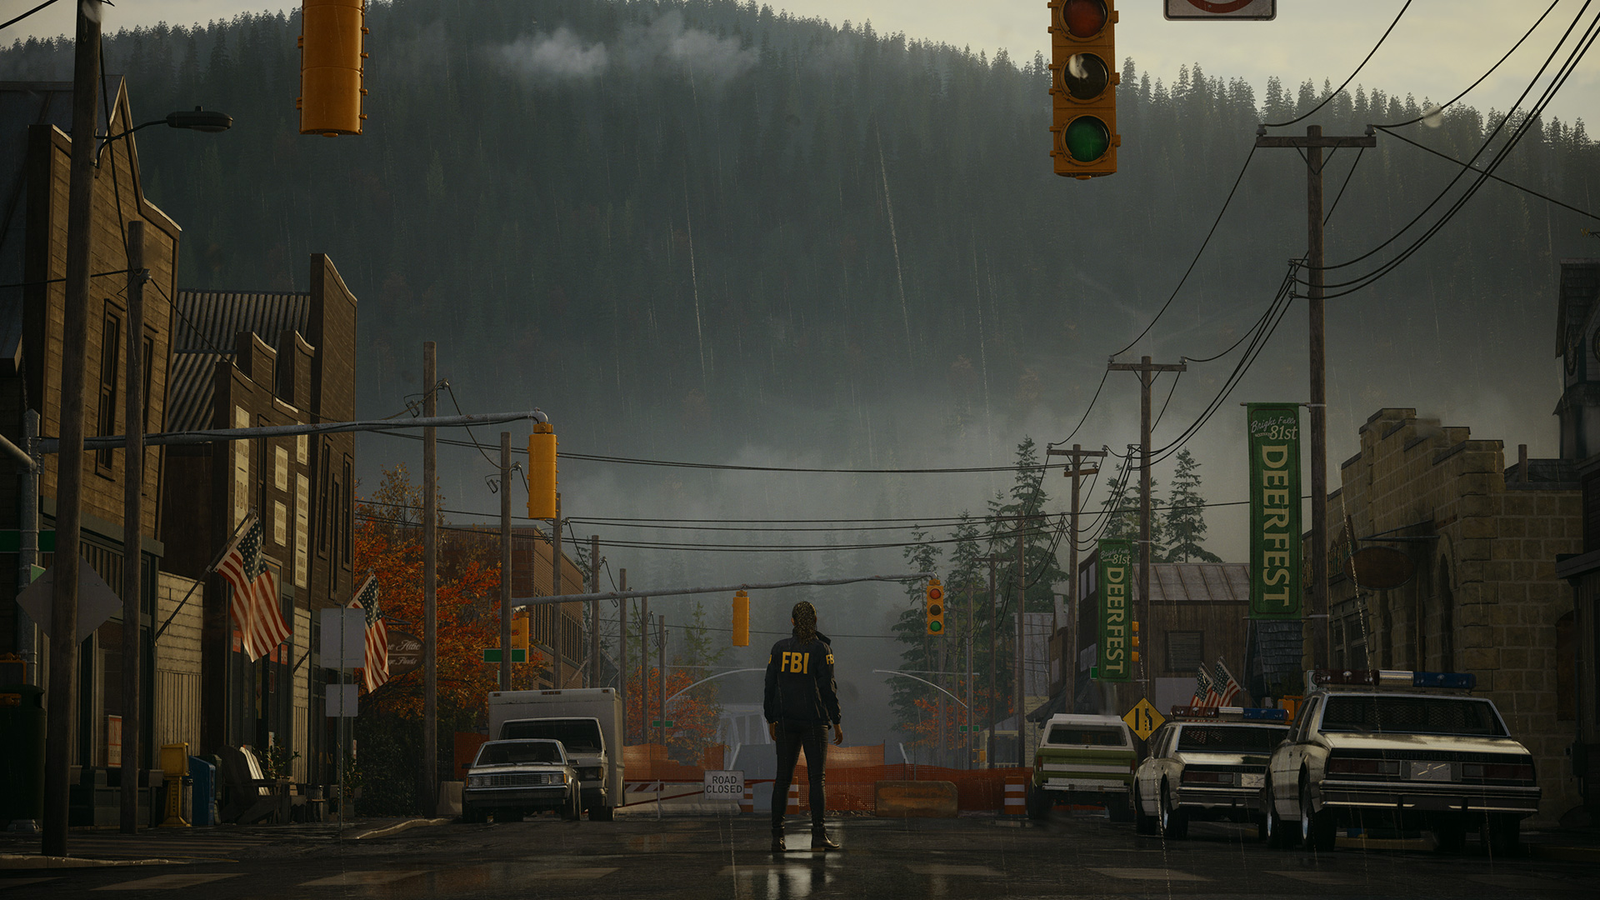 Alan Wake 2 Gameplay Revealed at PlayStation Showcase, Will Be Digital Only  on Release — Too Much Gaming